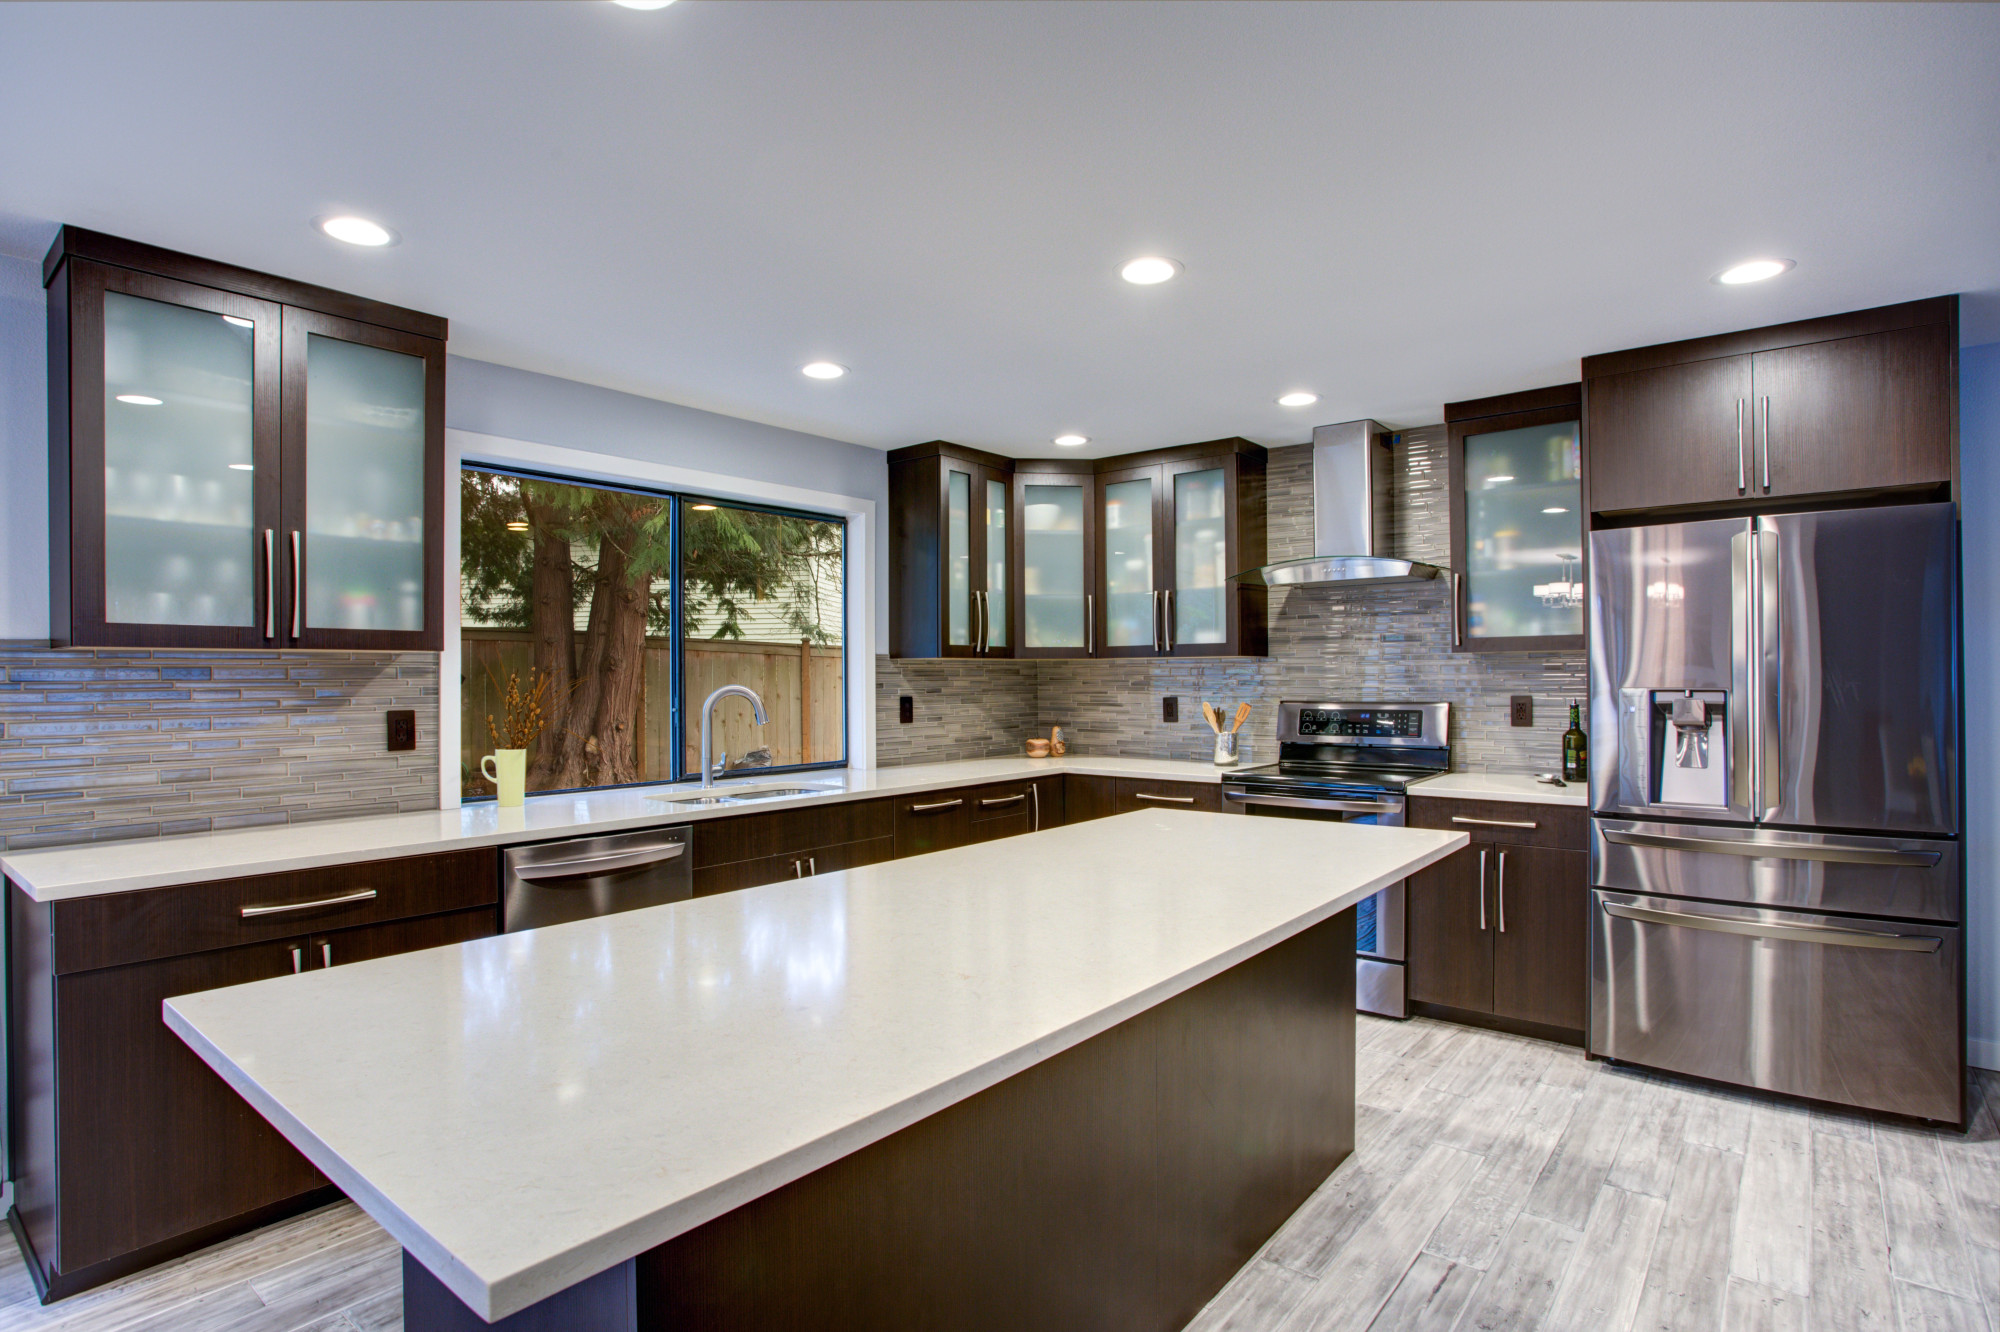 Which Type Of Countertops Will Save You Time Trouble The Best